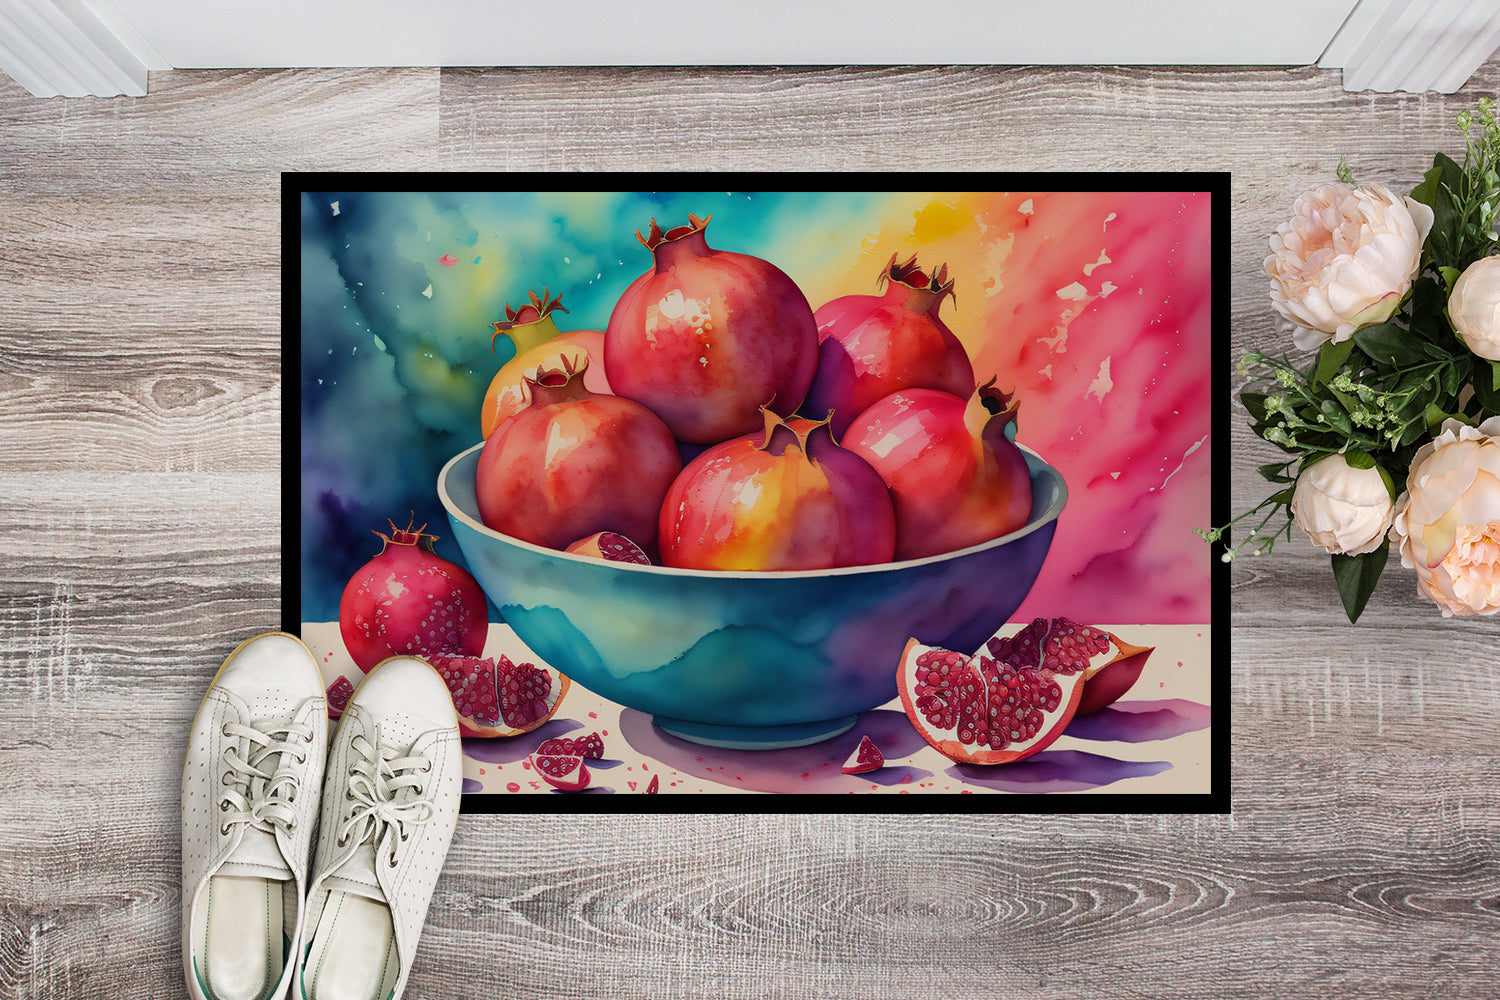 Buy this Colorful Pomegranates Doormat 18x27